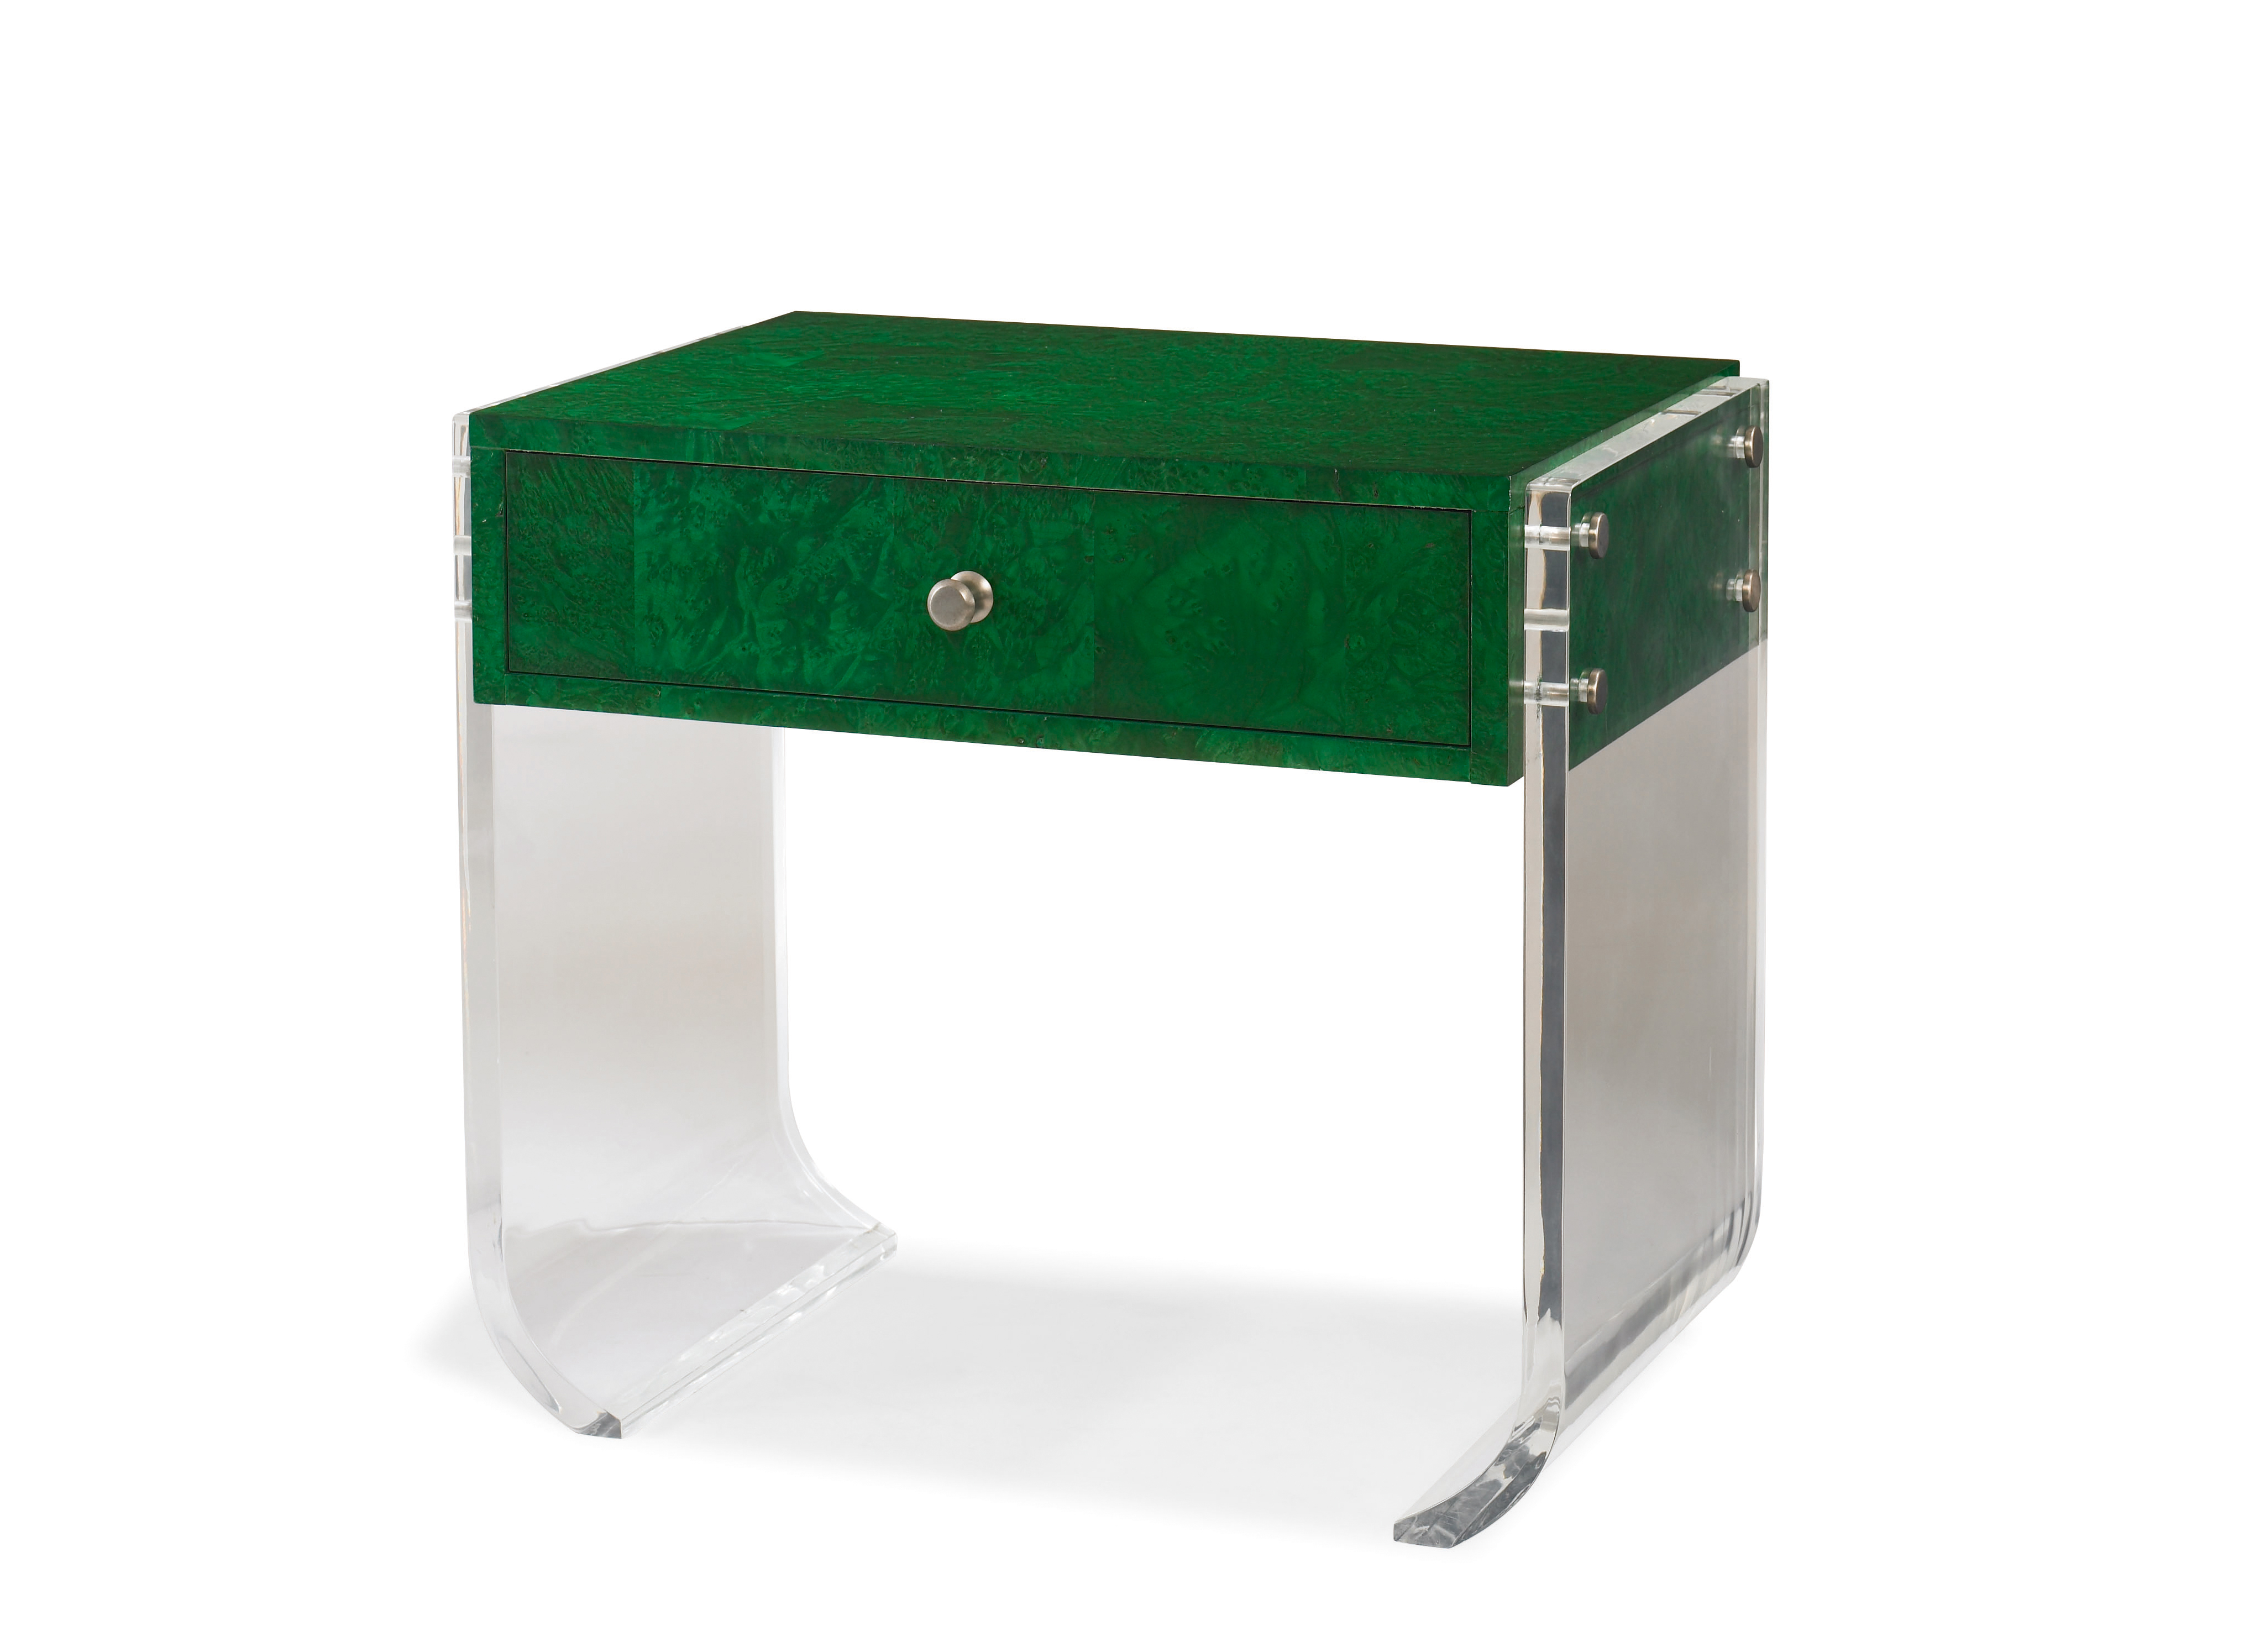 graze end table malachite living room side accent tables green century furniture robb stucky dresser magnussen densbury coffee round metal target armoire desk dining mats mirrored